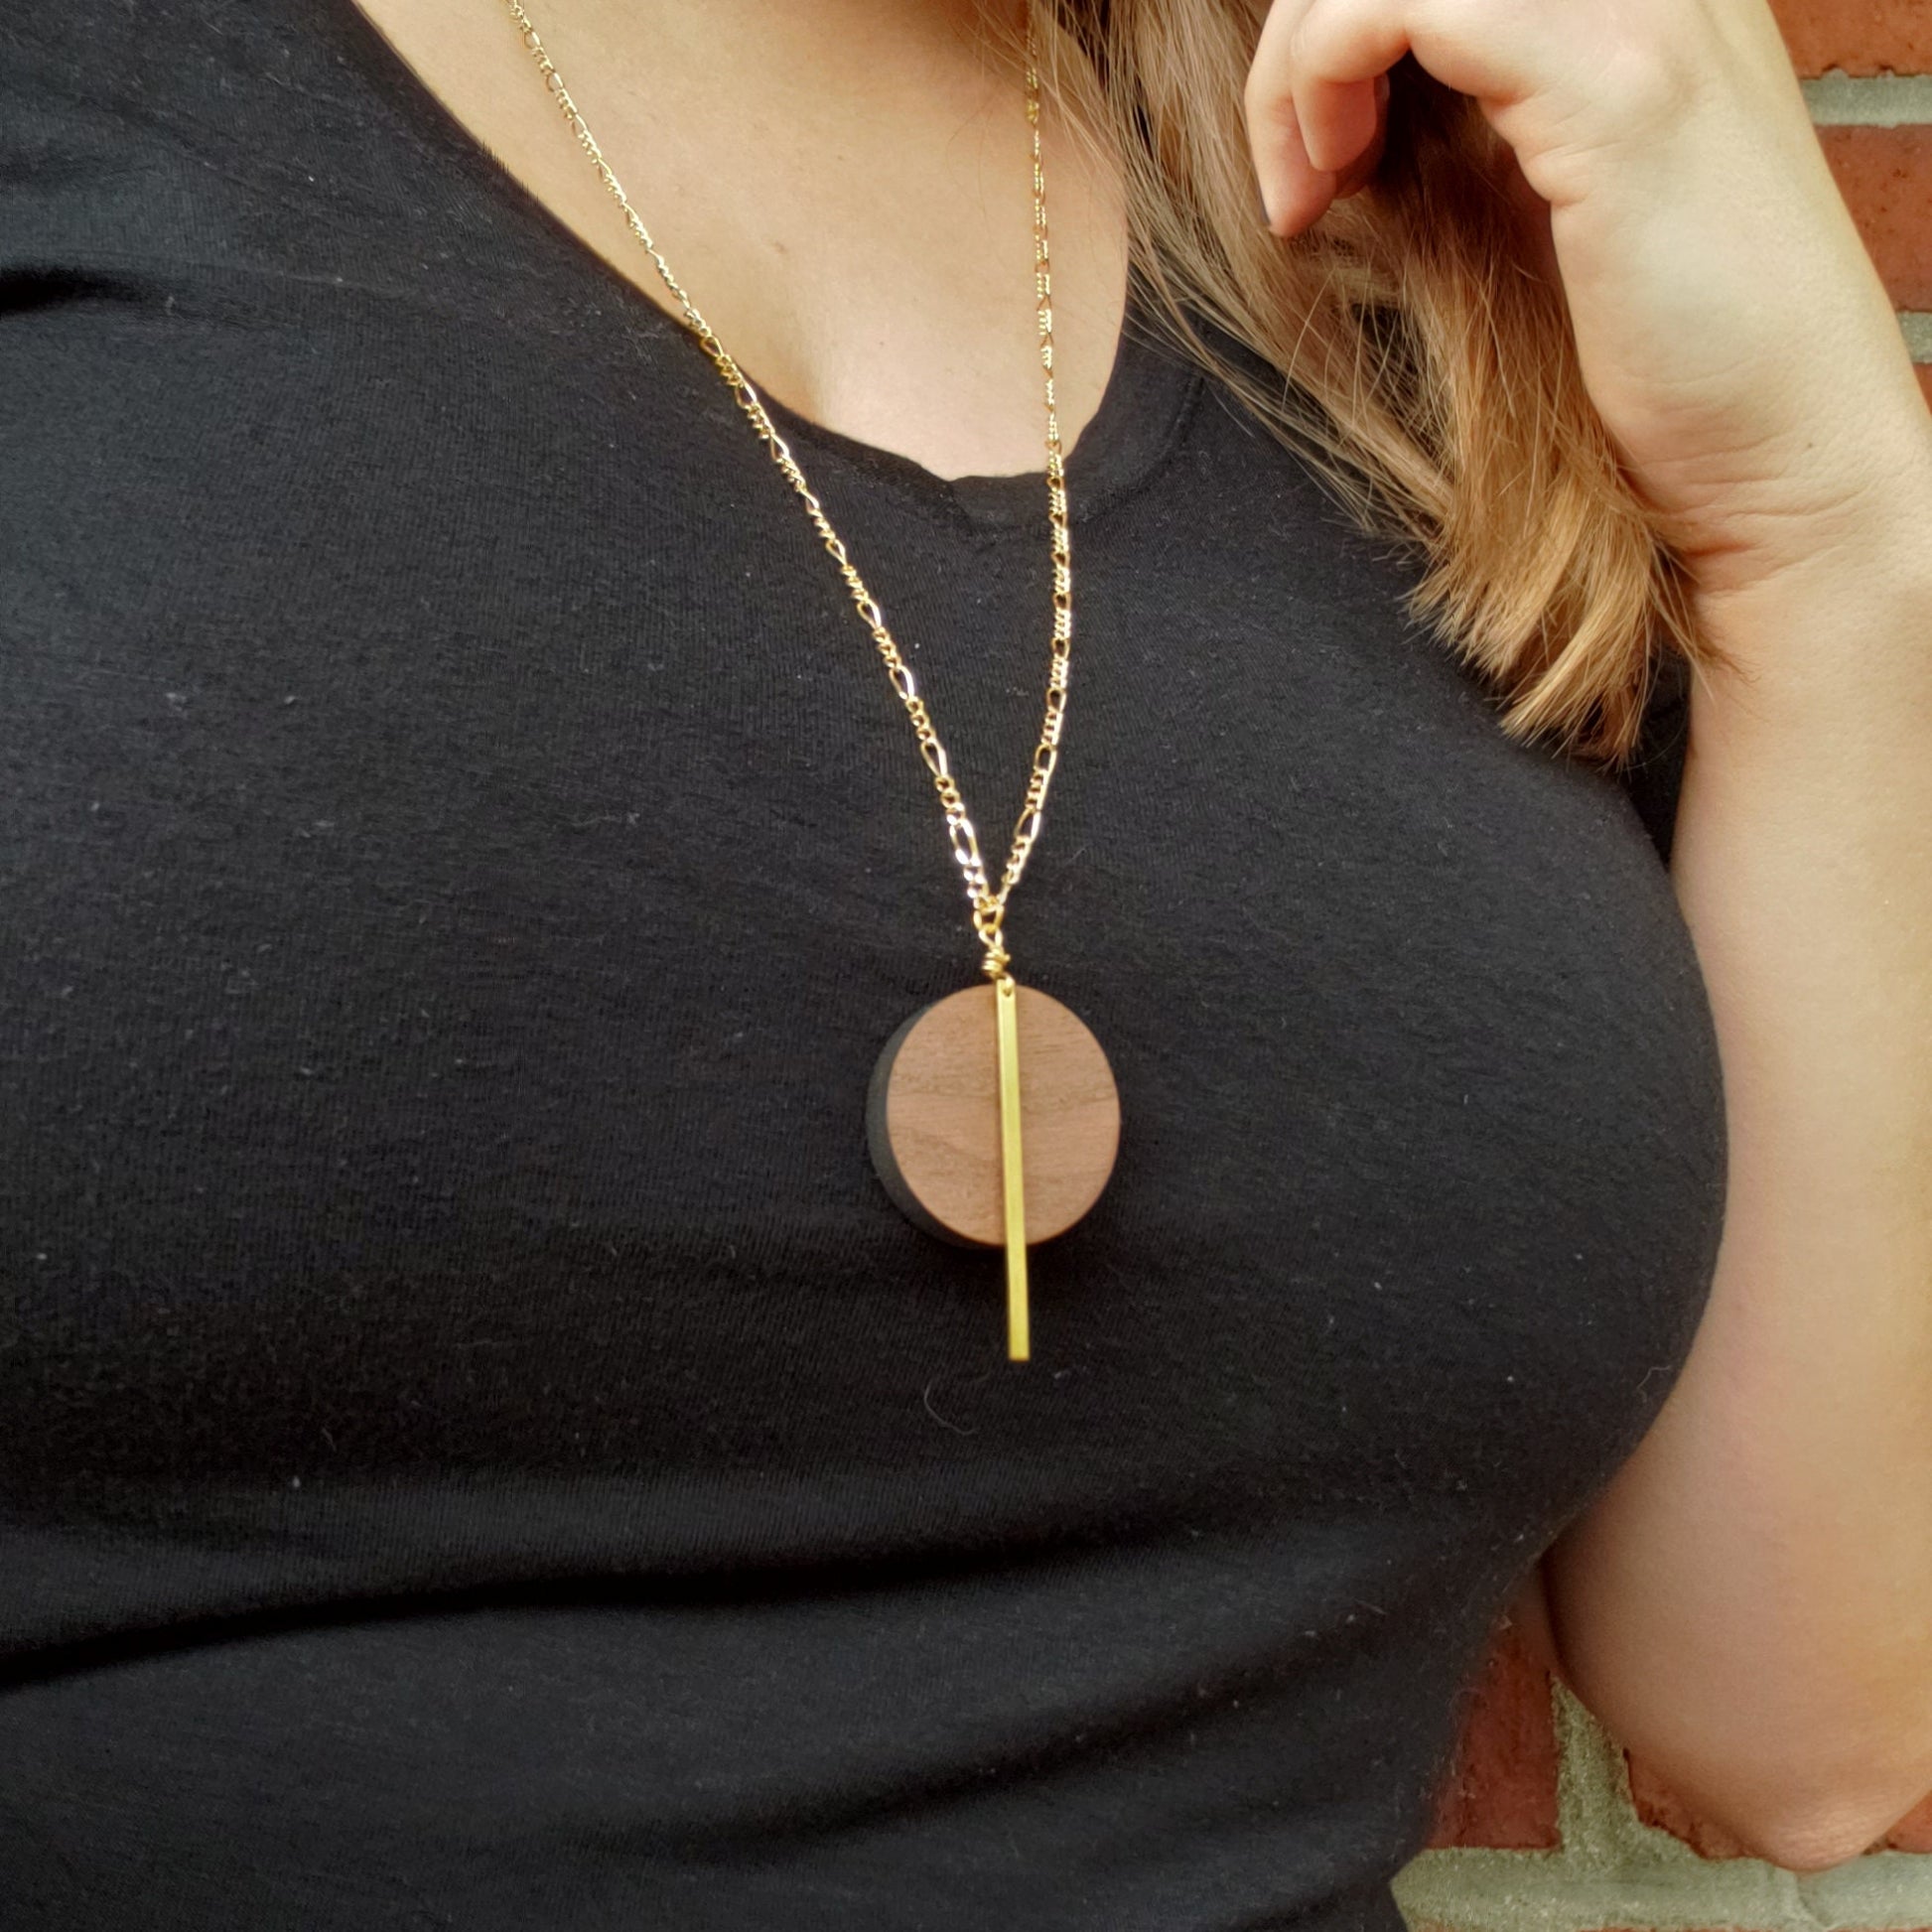 Pendulum - Laser Cut Wood Necklace || Modern Geometric Jewelry || 5th Anniversary Gift for Her